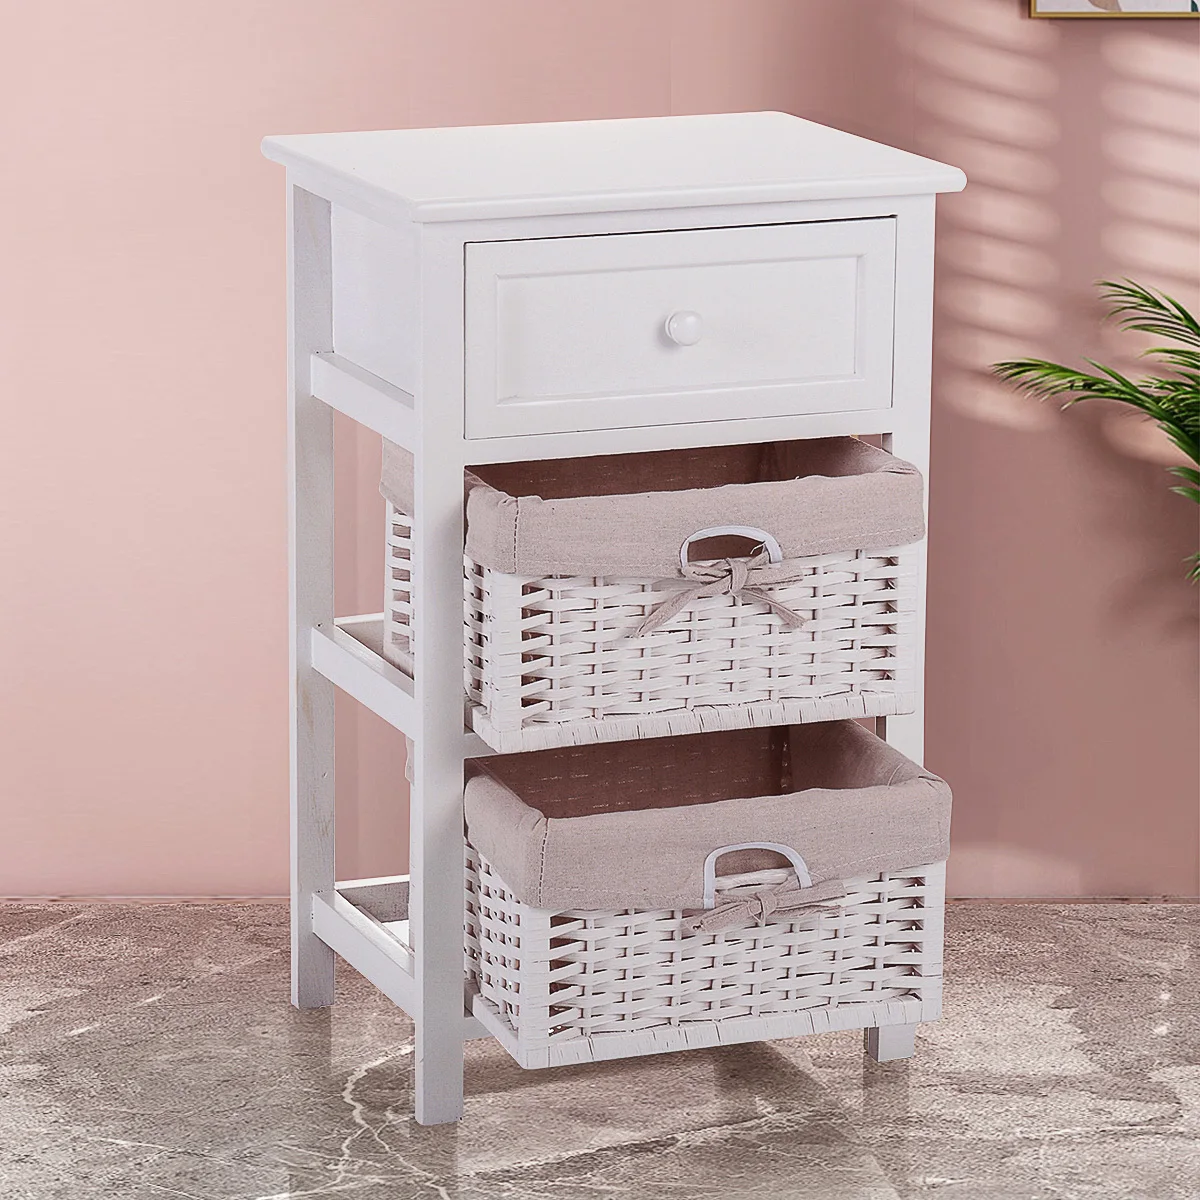 

Modern White One Drawer Nightstand with Tall Legs and Two Removable Baskets for Indoor Storage, Stylish Bedside Table, Contempor